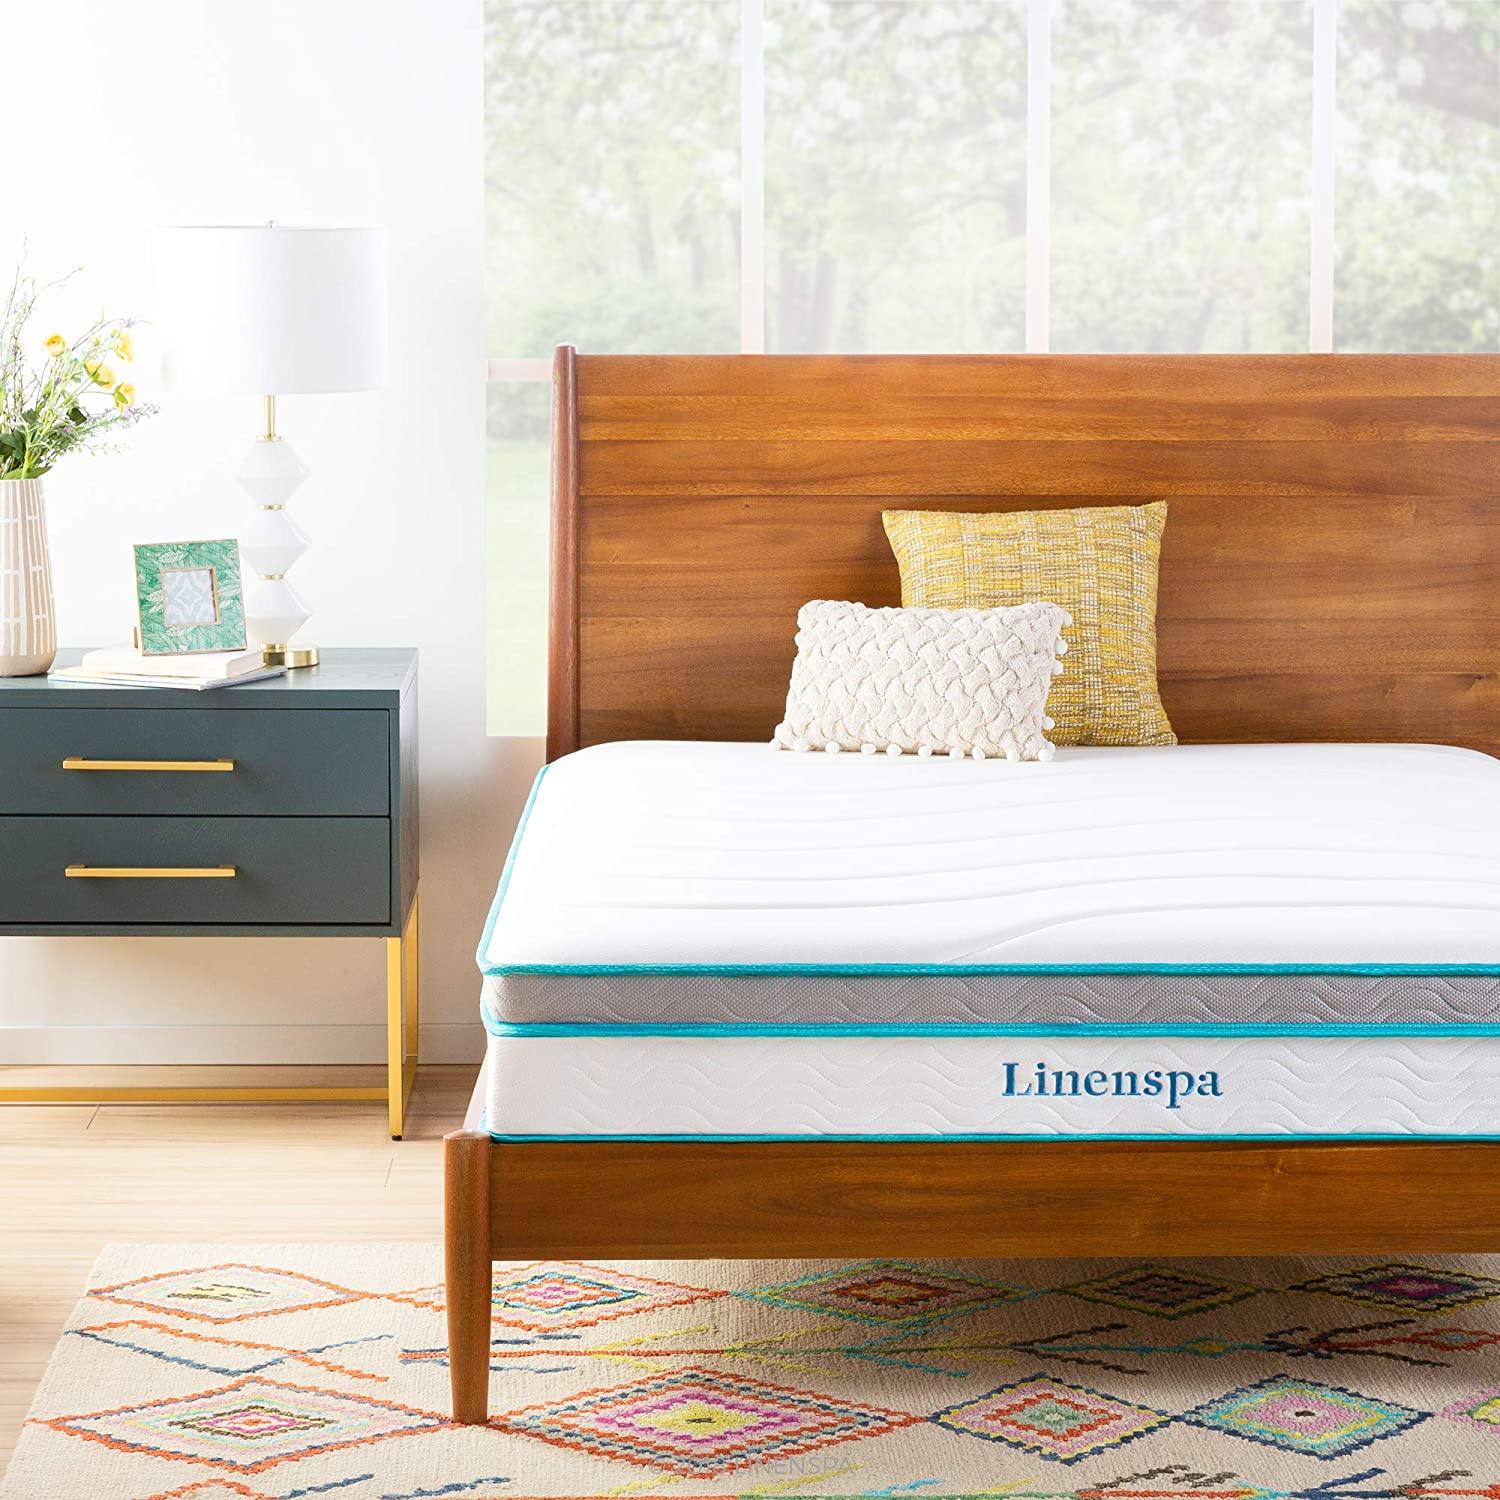 Linenspa 10in Memory Foam and Innerspring Hybrid Mattress for $111.99 Shipped